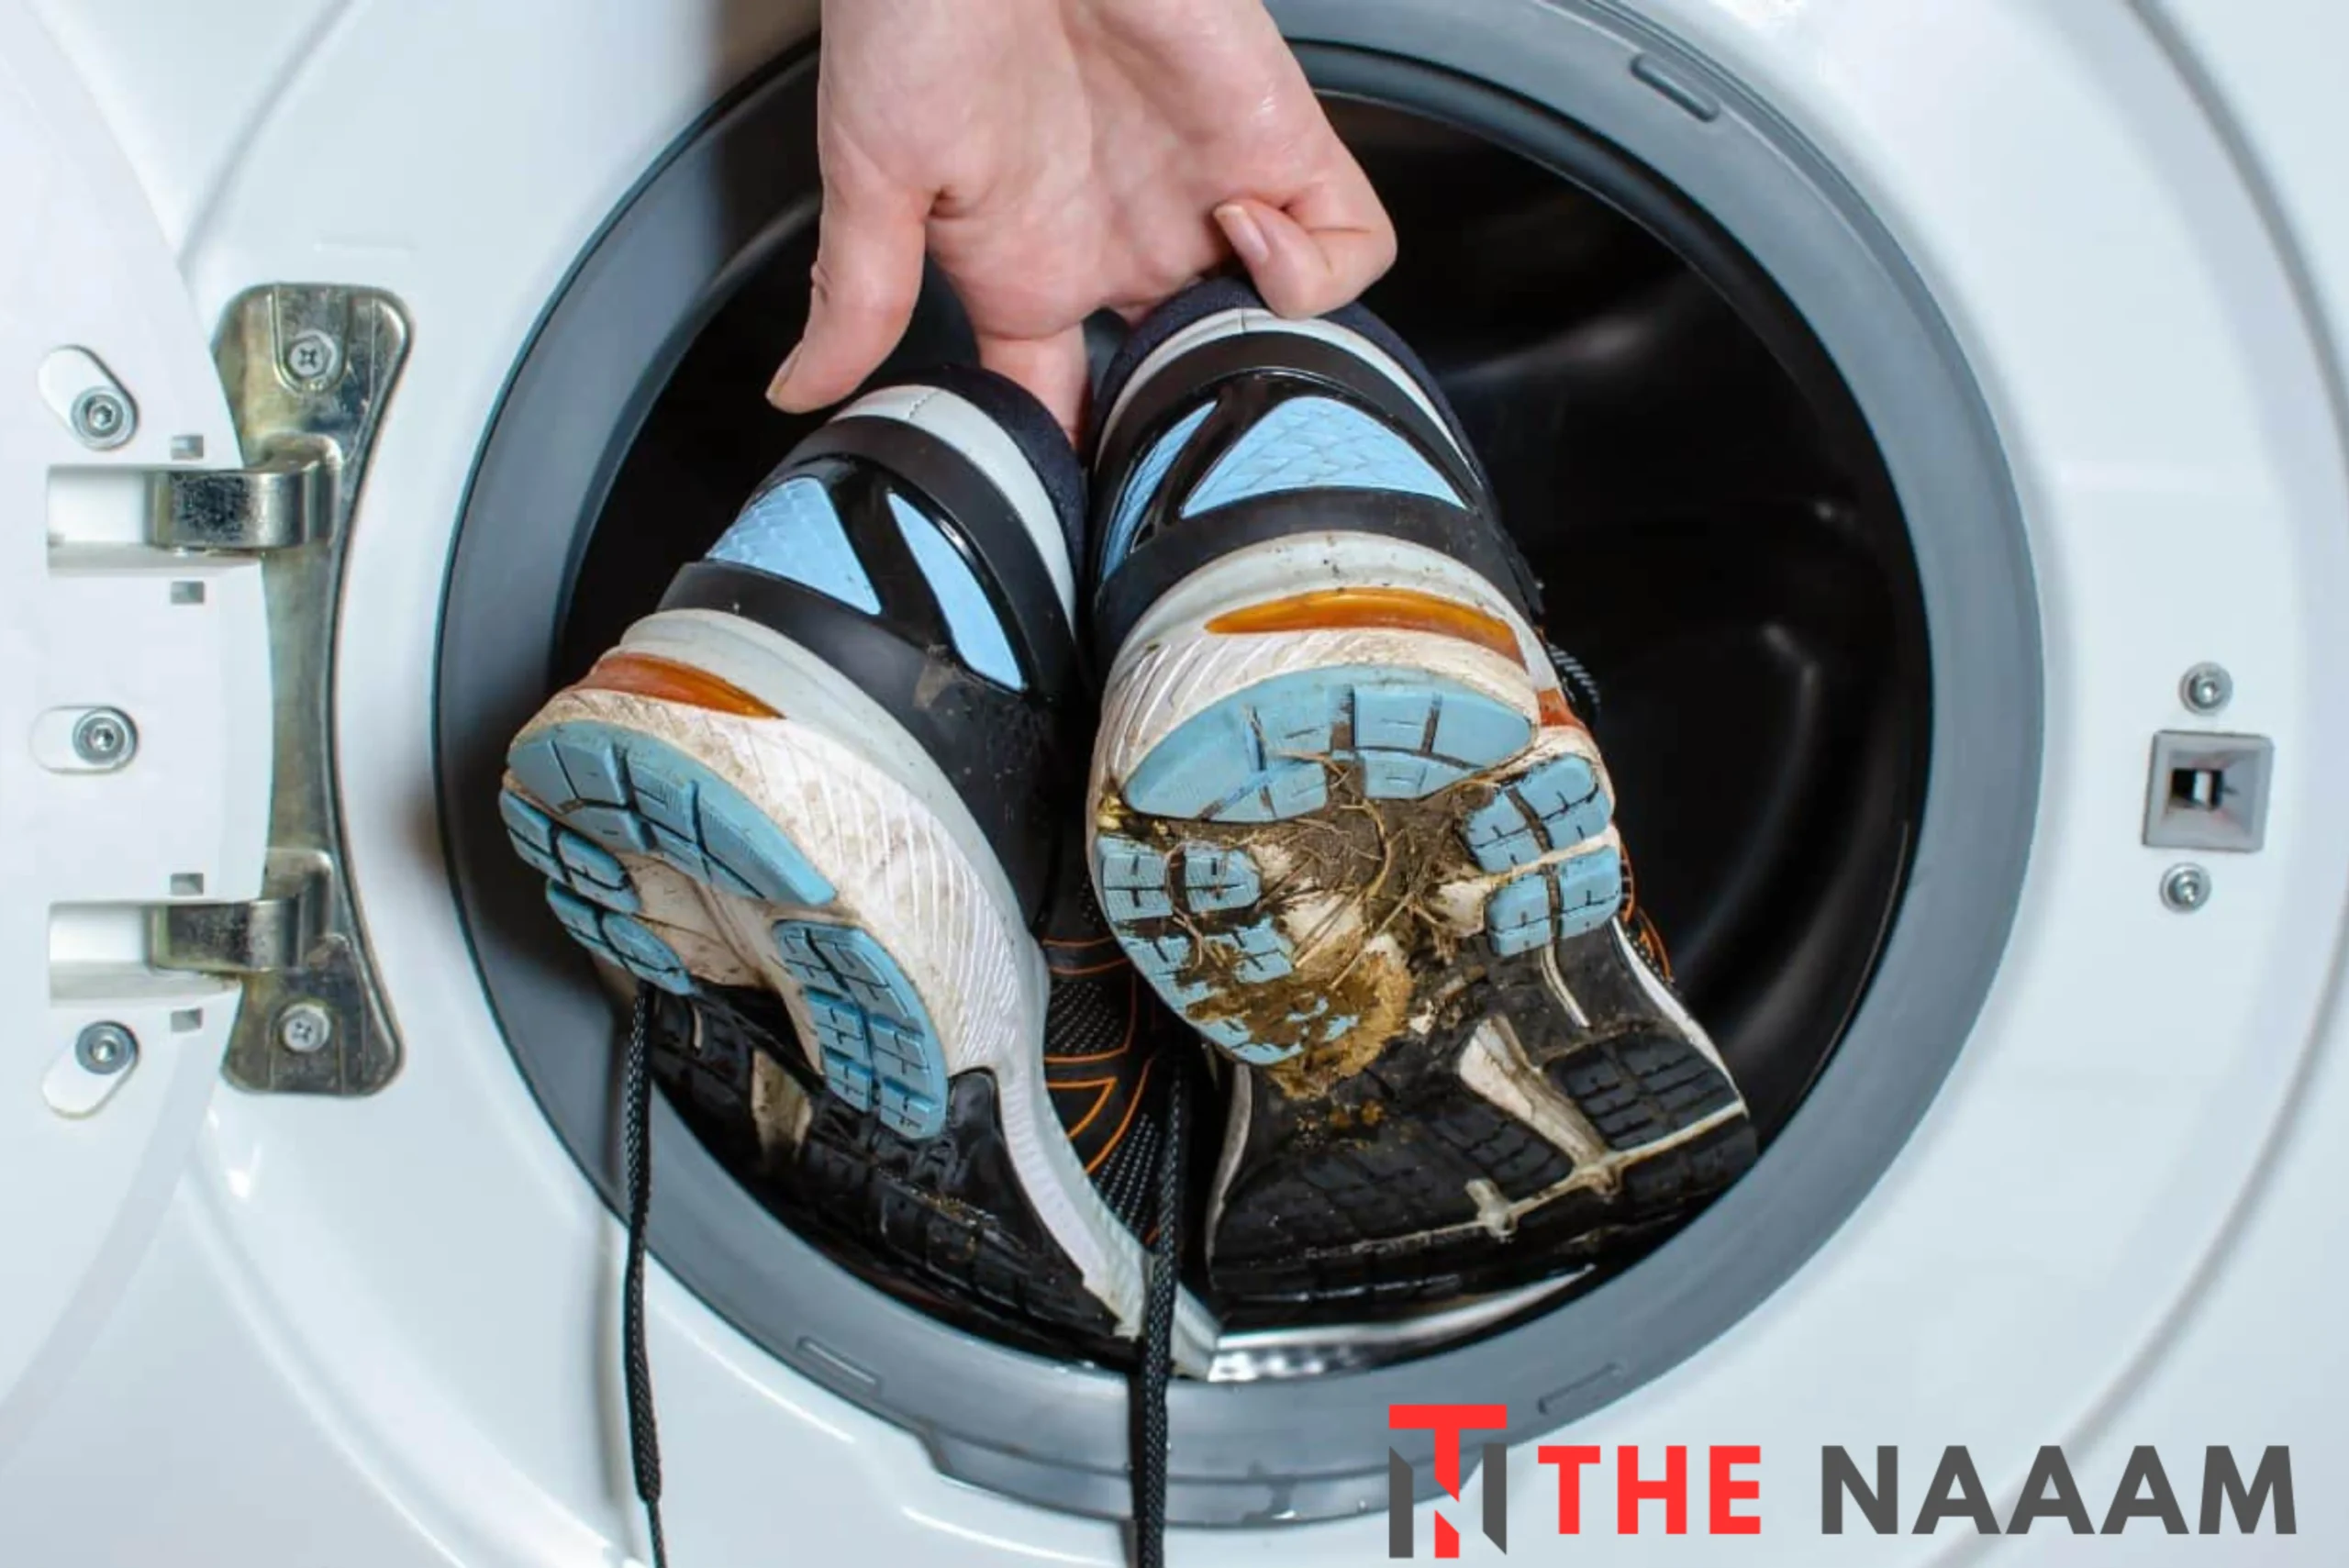 How To Wash Tennis Shoes In Washer a Comprehensive Guide